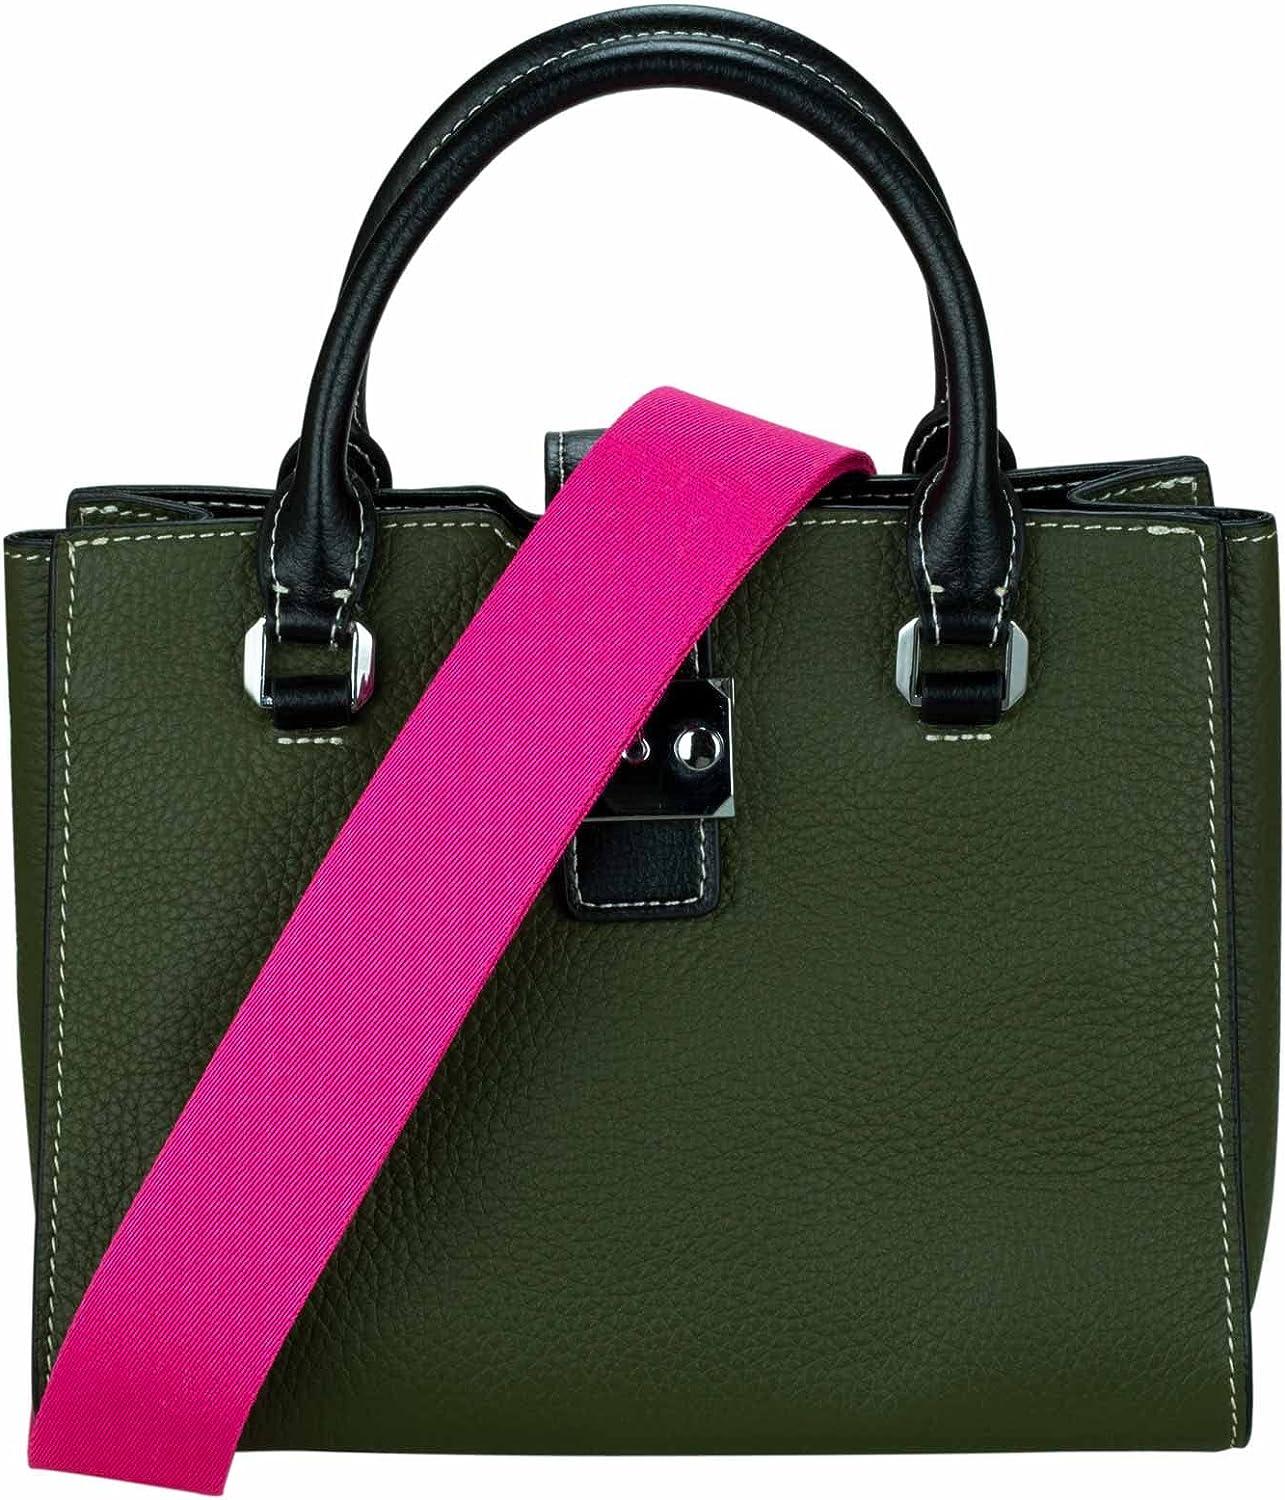 Thick Strapped Leather Crossbody Bag and Purse